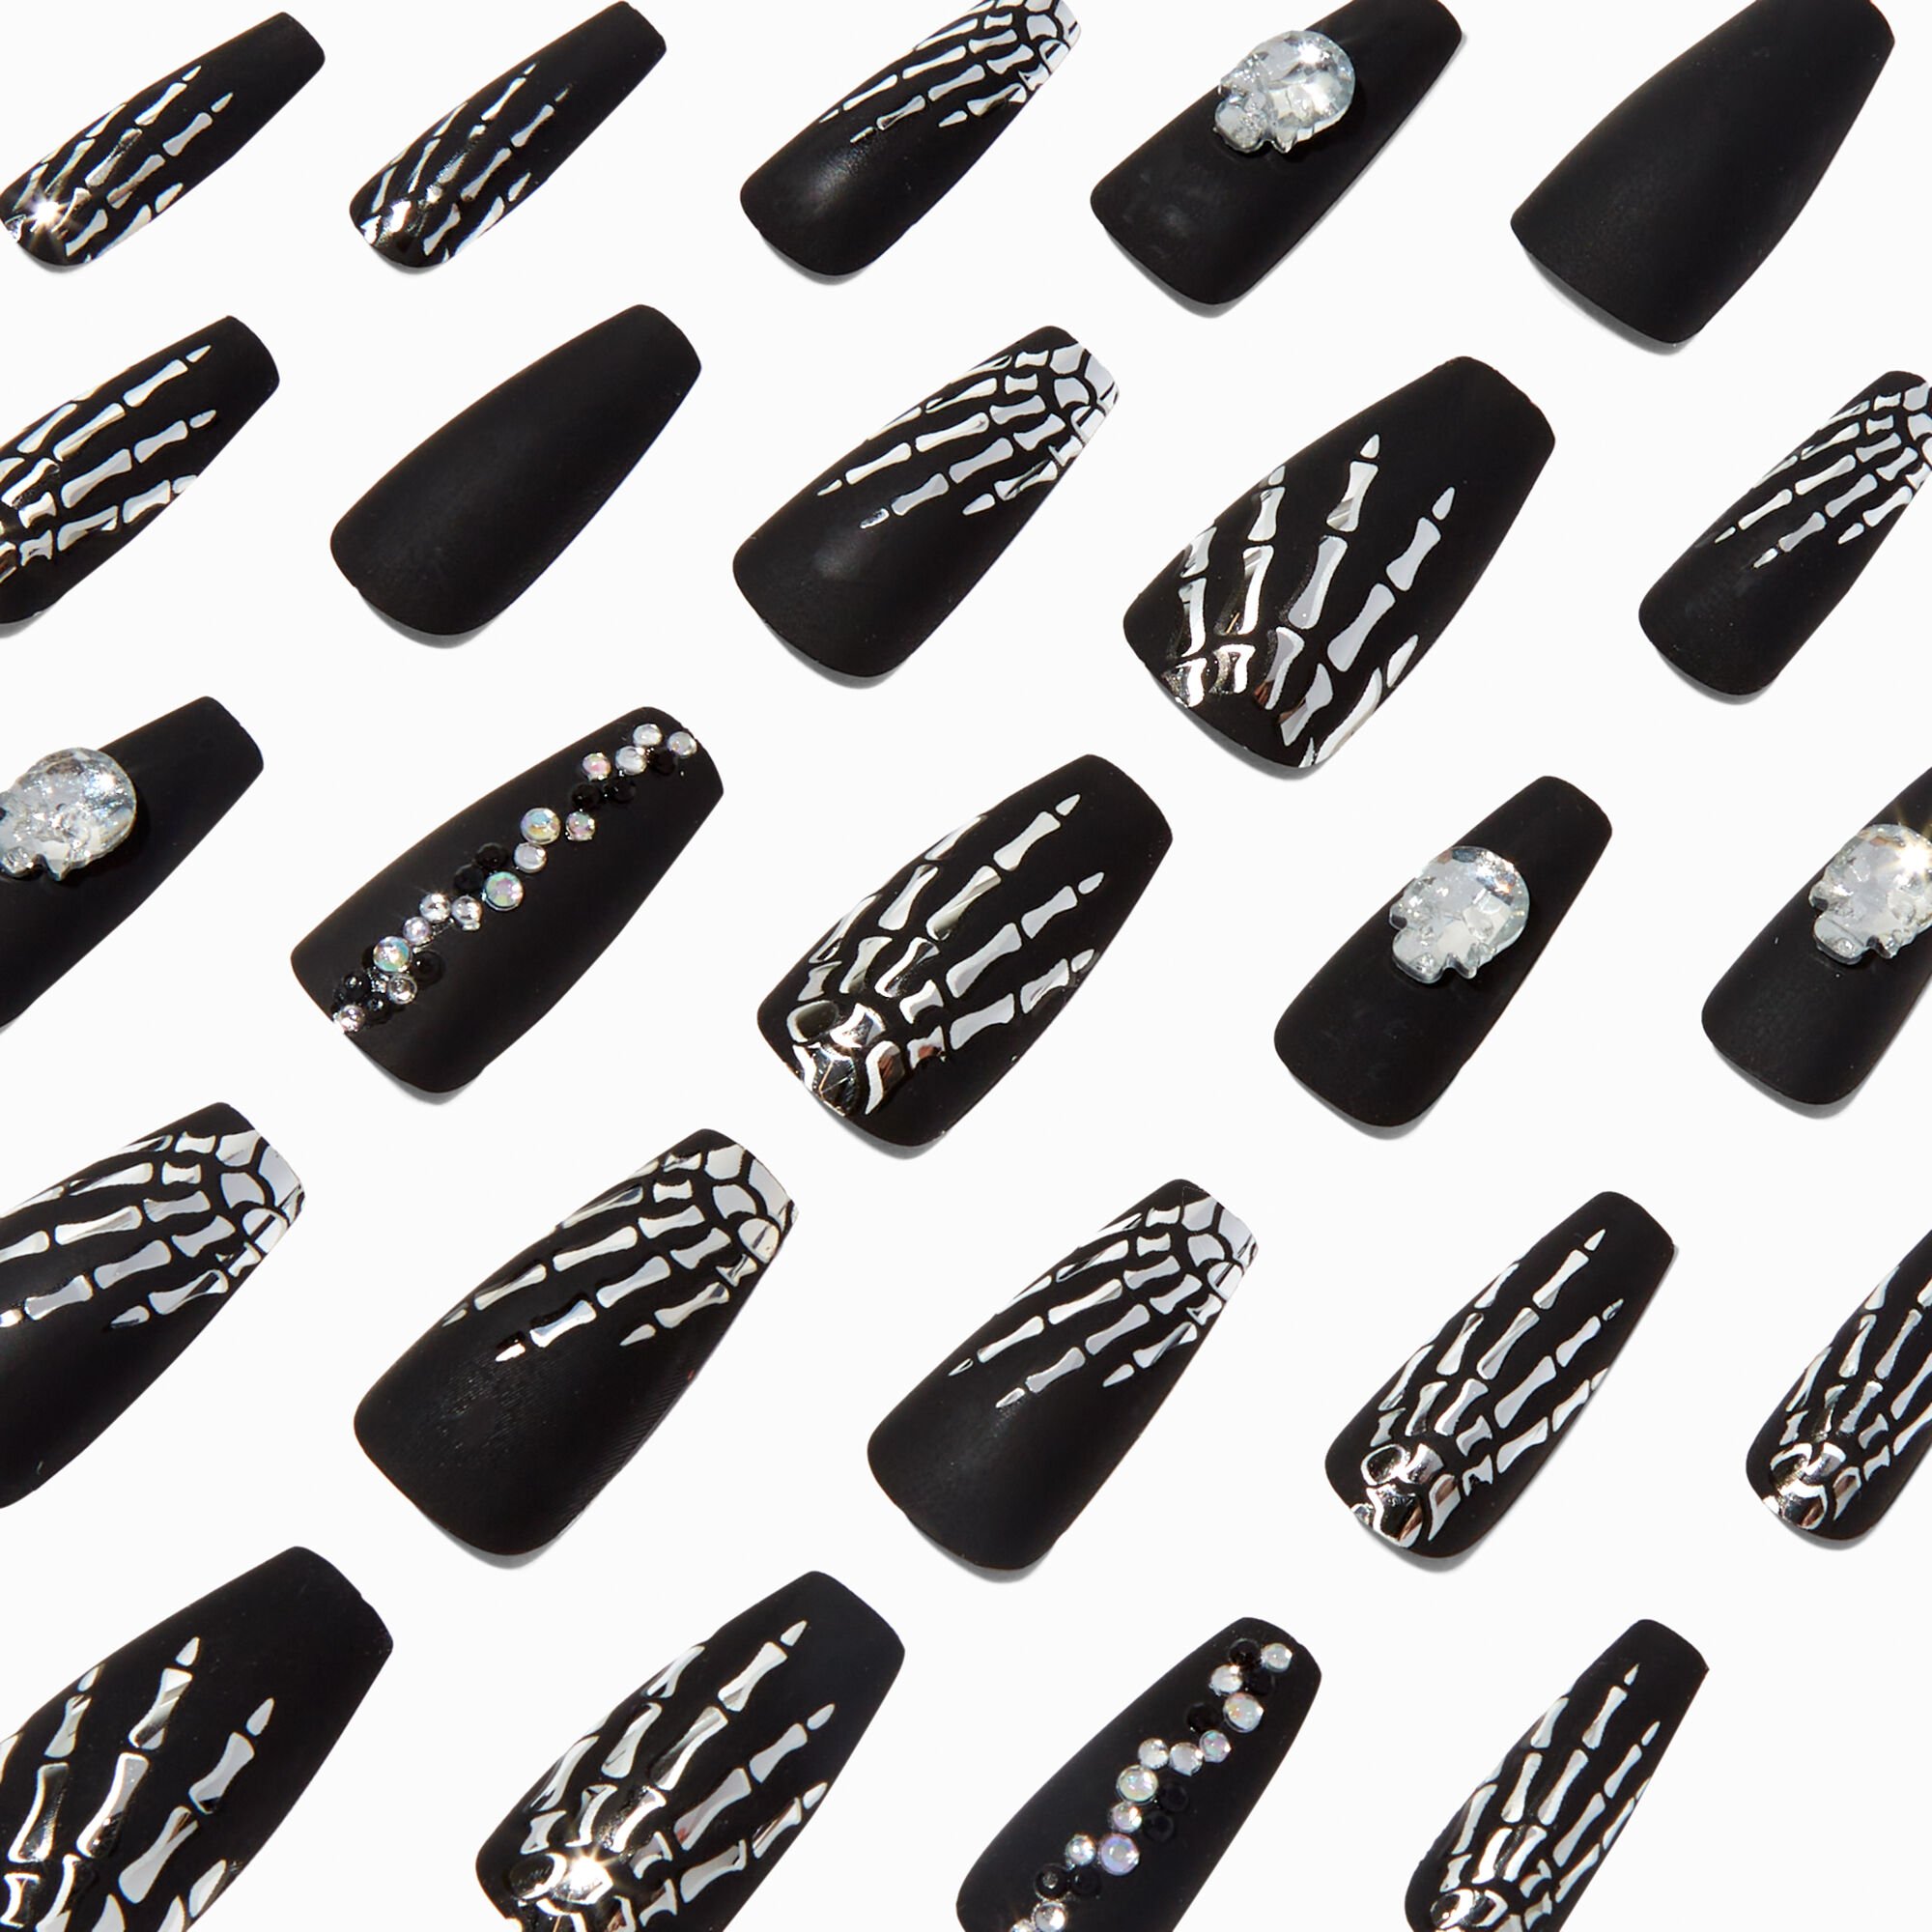 View Claires Embellished Skeleton Stiletto Press On Faux Nail Set 24 Pack information